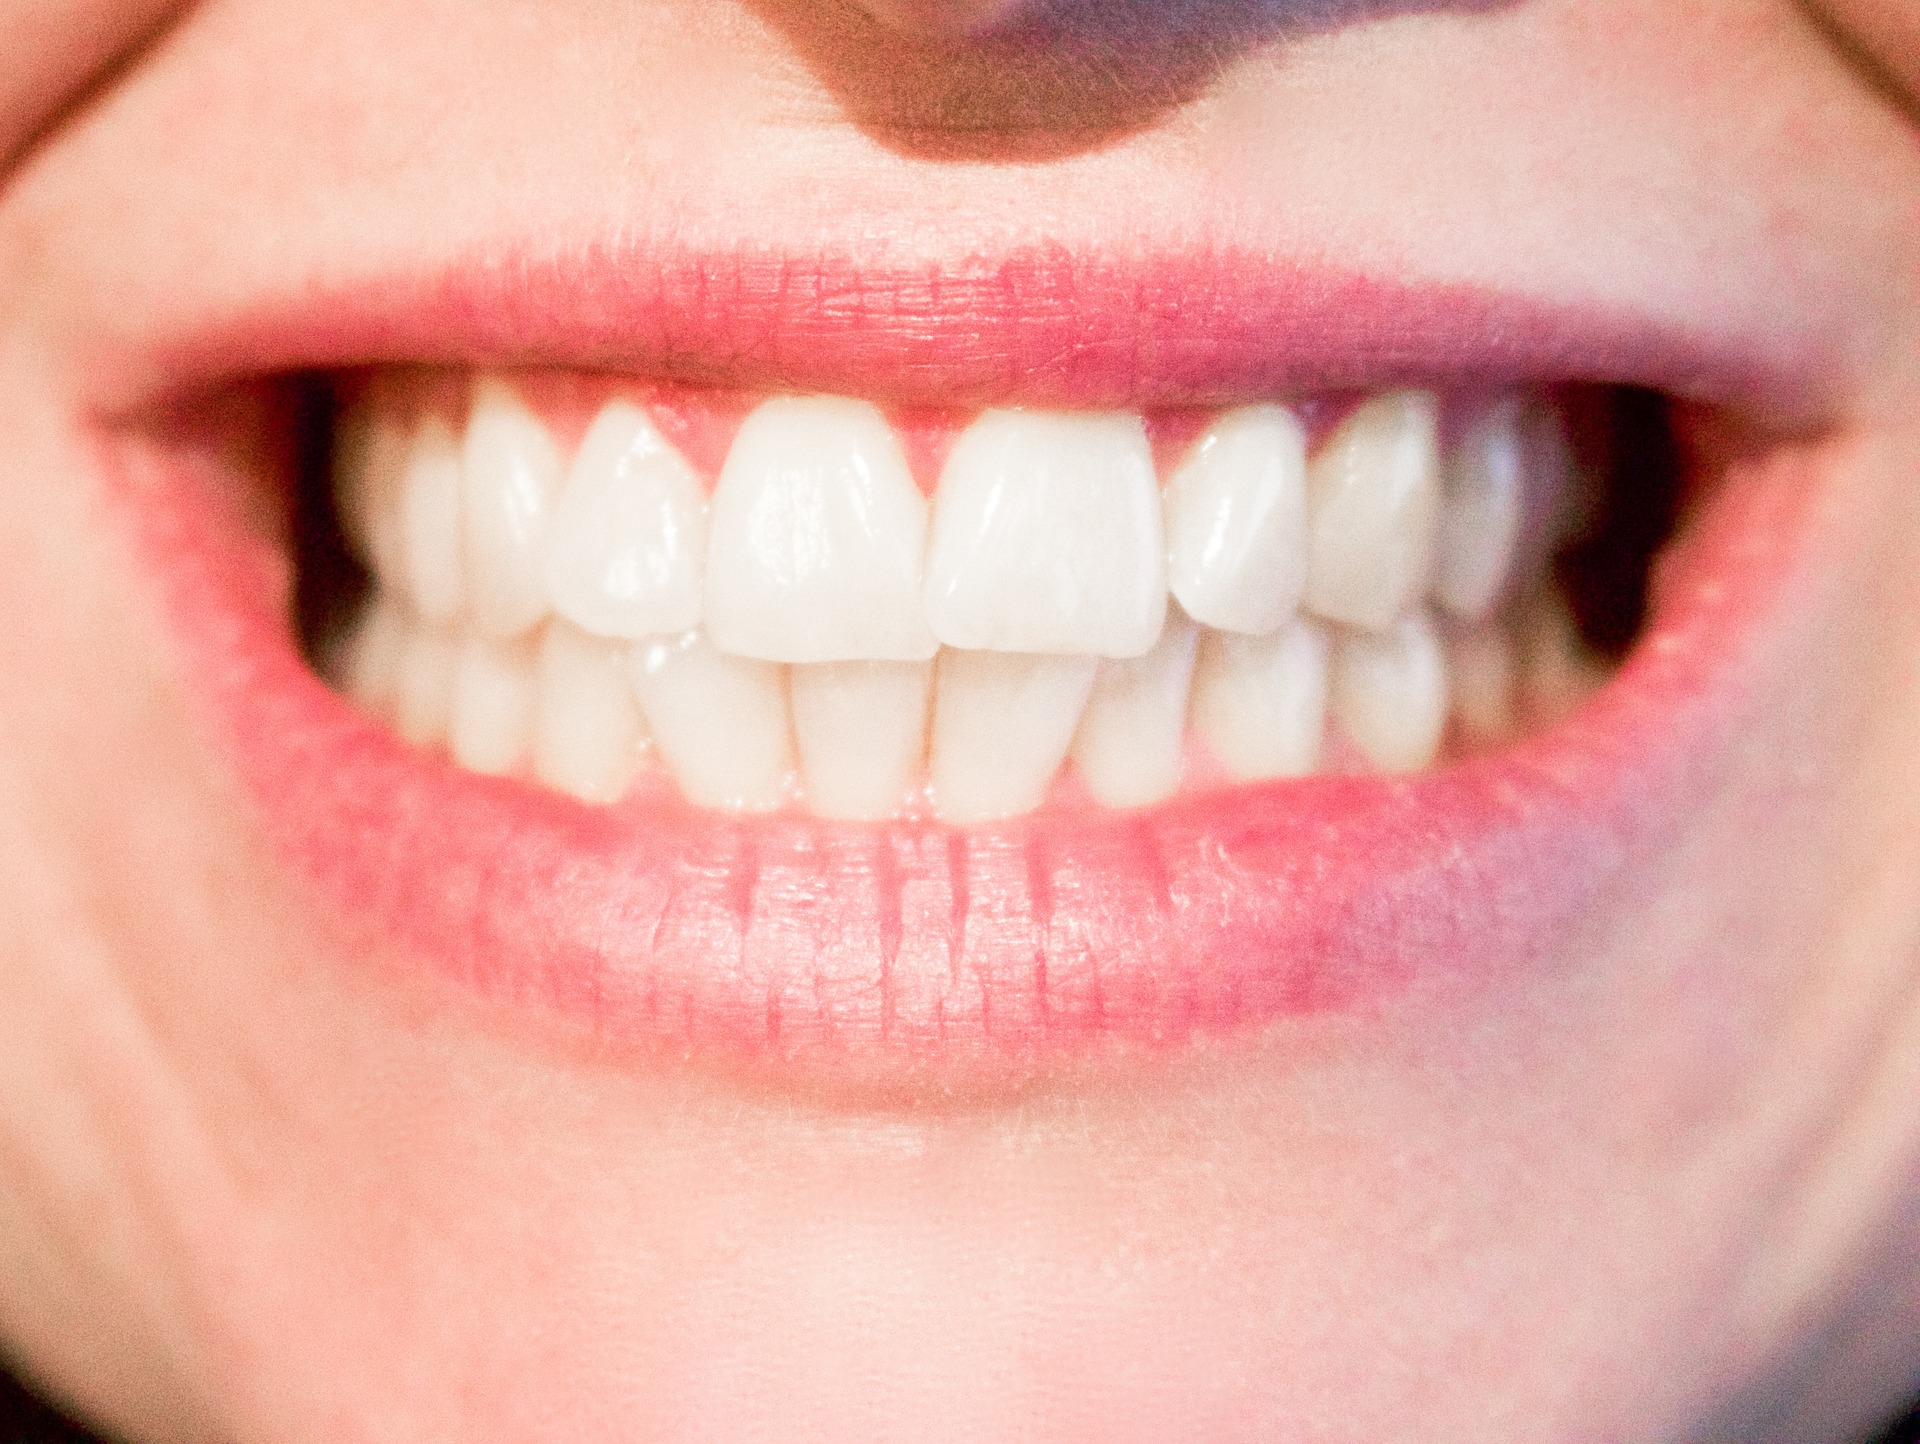 What is so good about Invisalign?